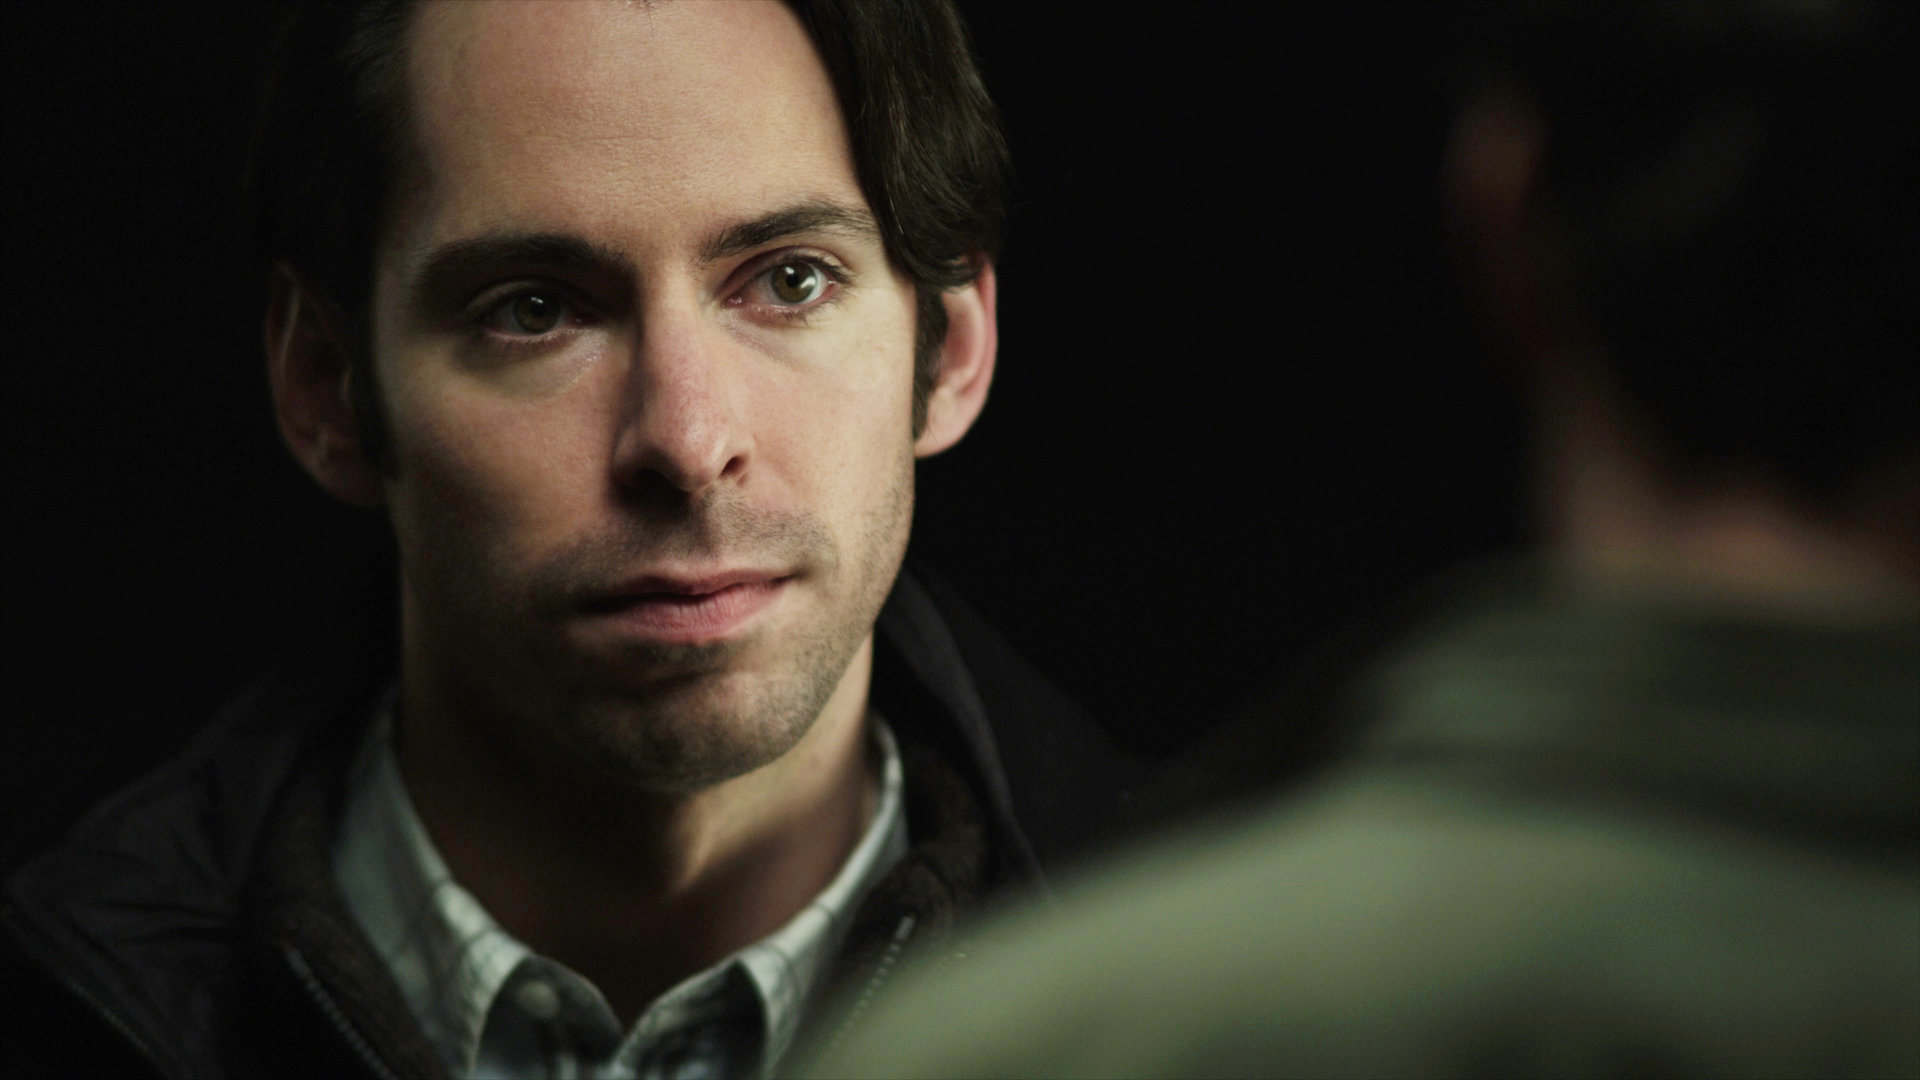 Martin Starr in 6 Month Rule (2011)